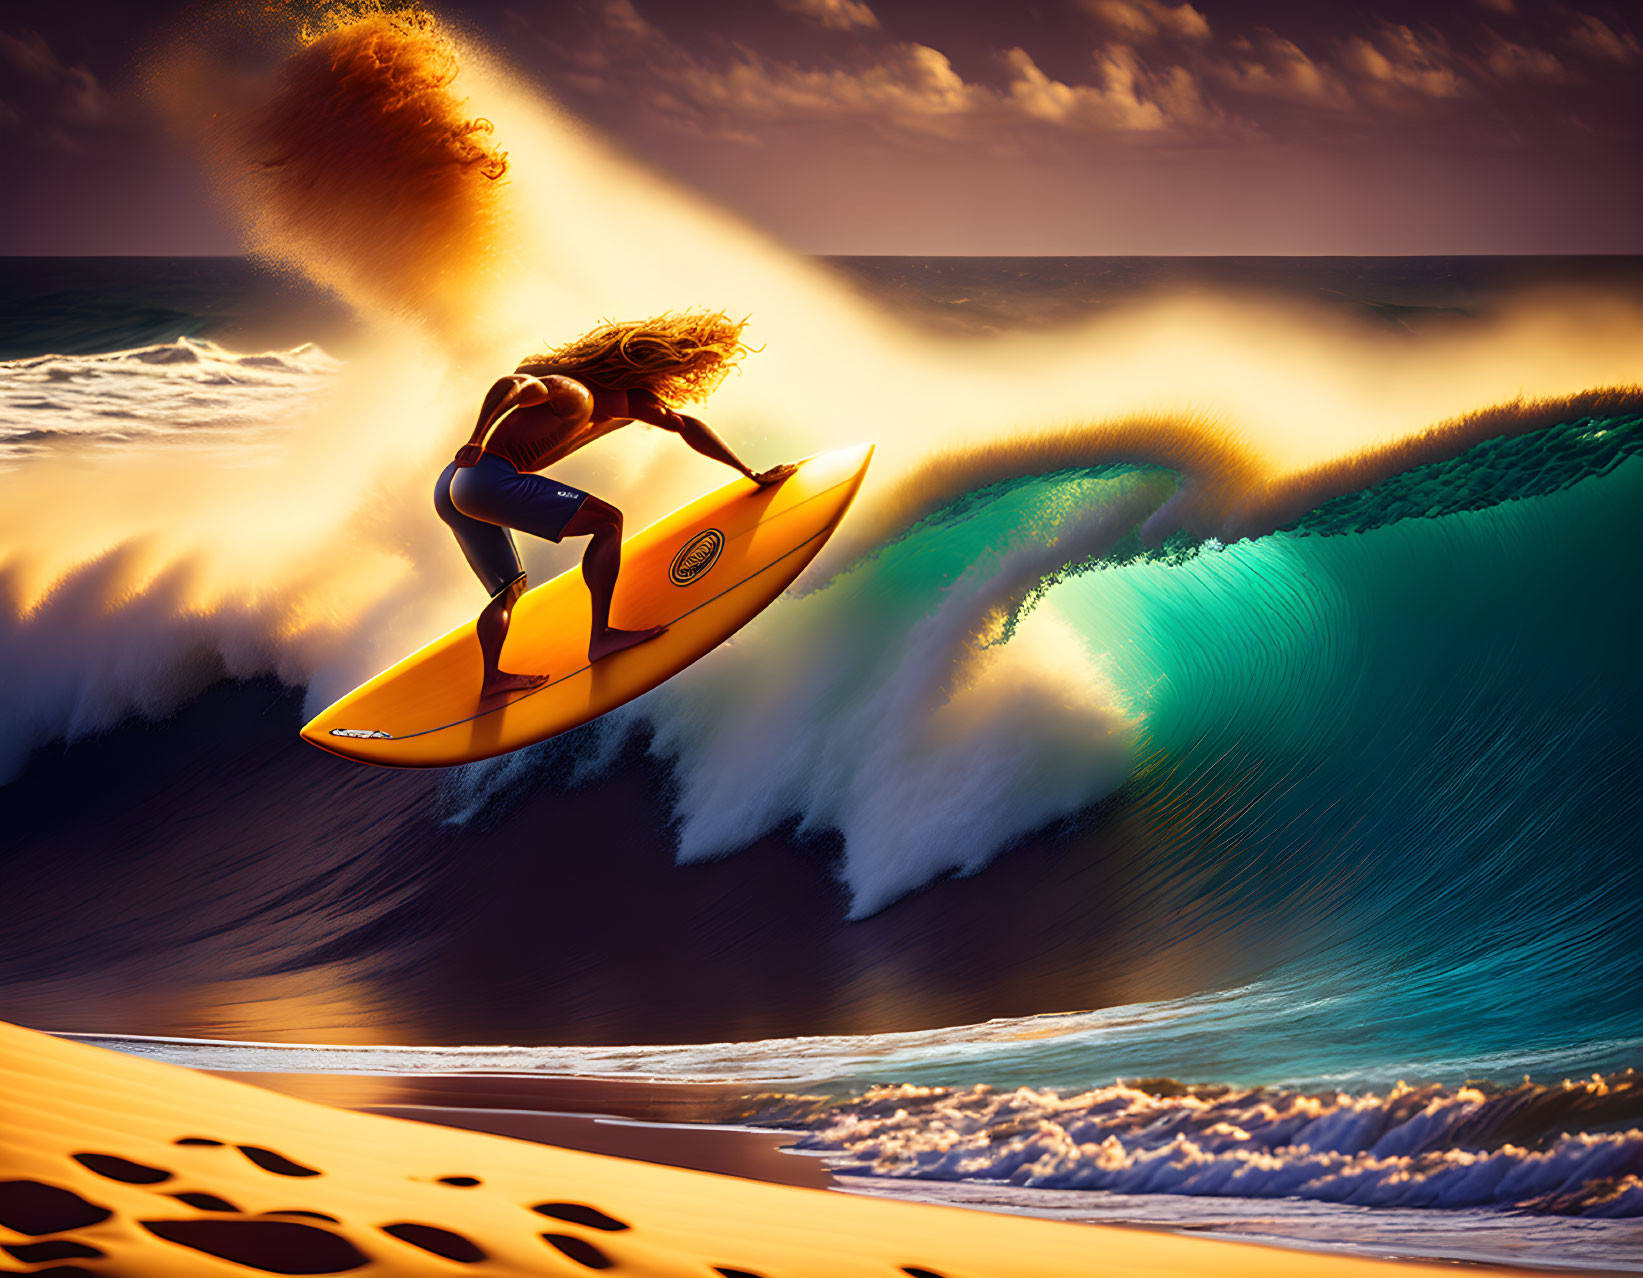 Surfer riding large wave at sunset with water spray and footprints on sand